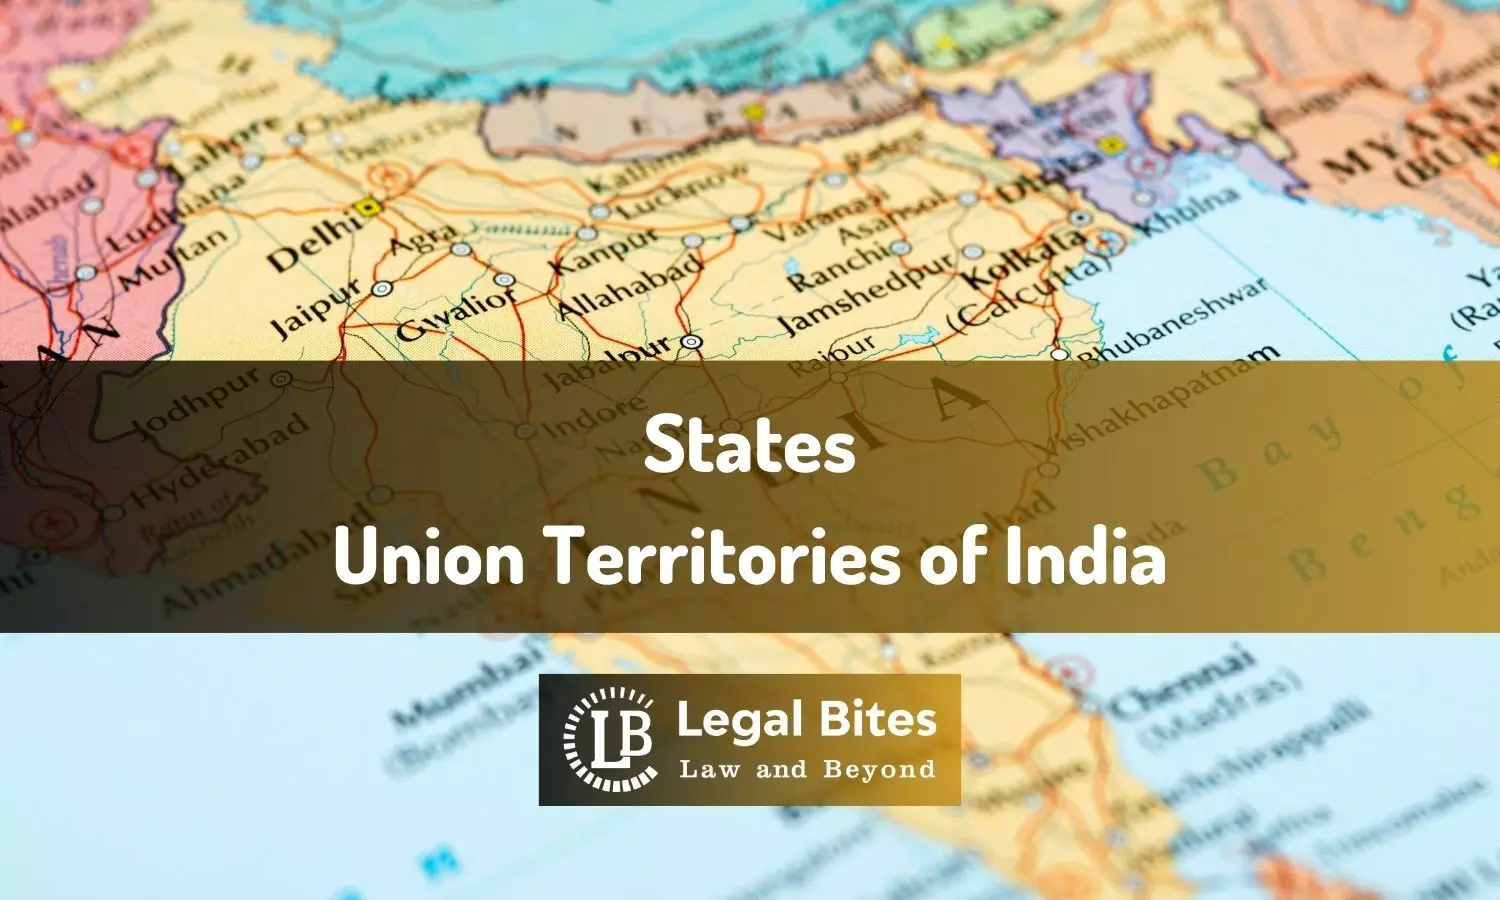 States and Union Territories of India